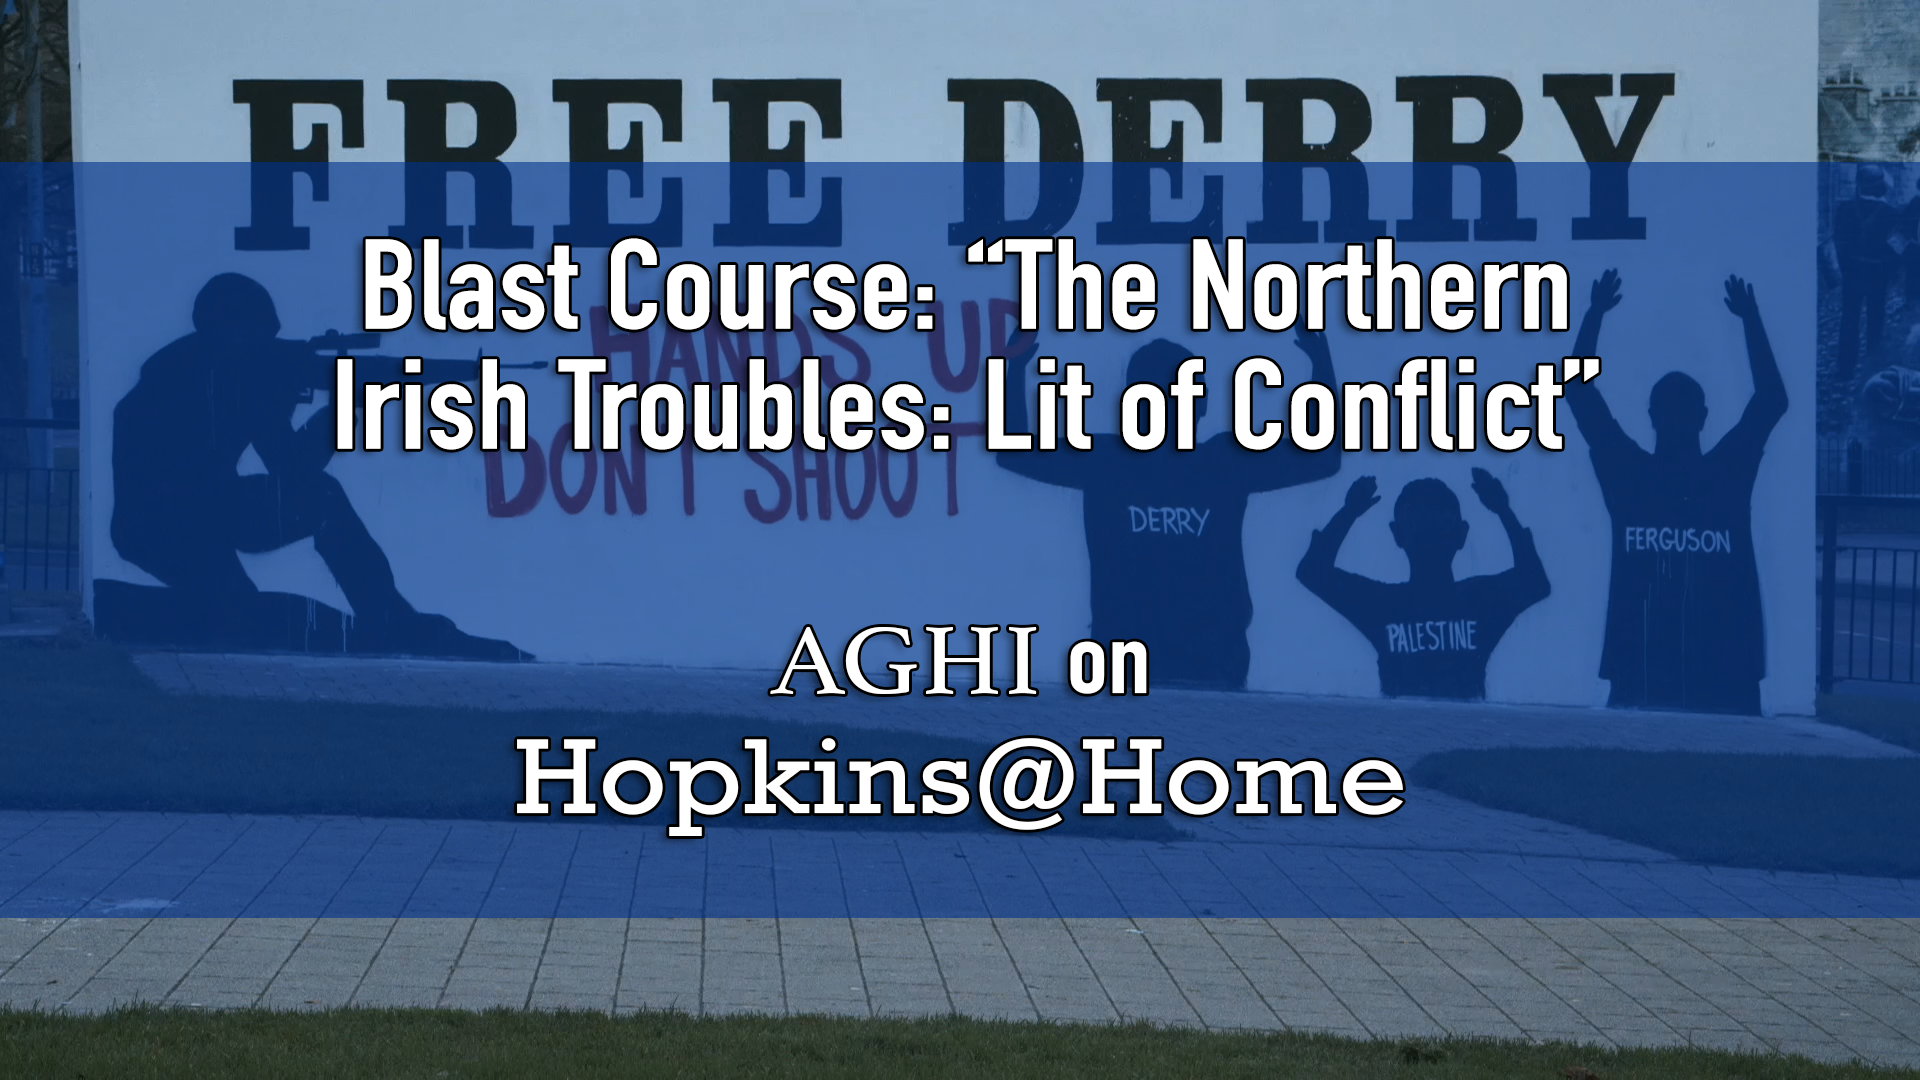 Blast Course: "The Northern Irish Troubles: Literature of Conflict"